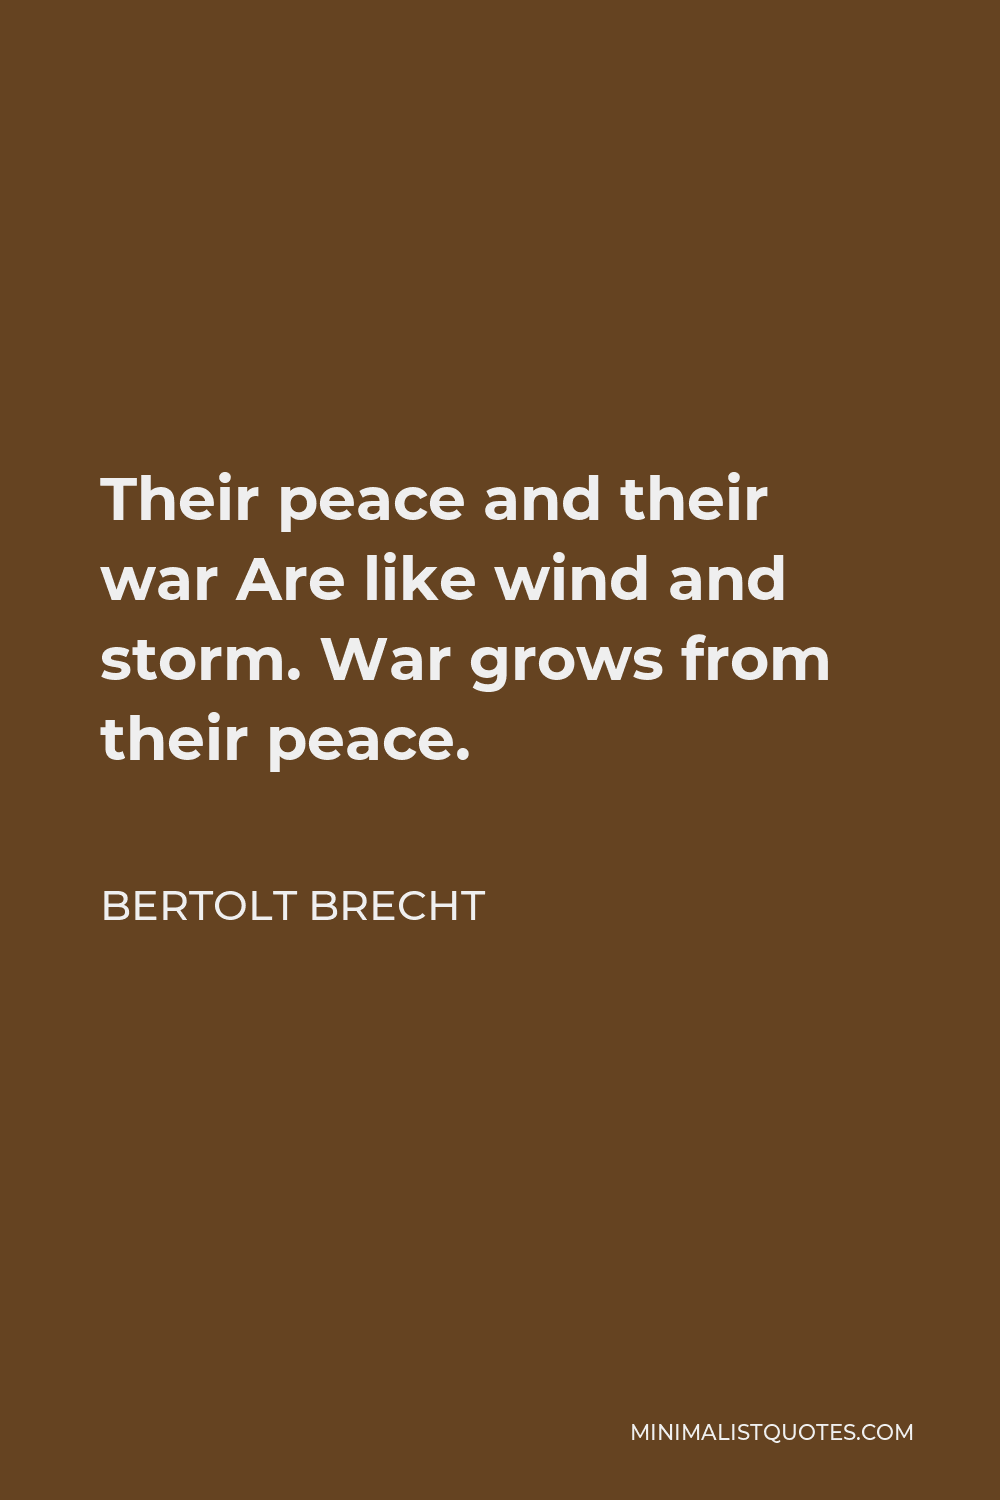 Bertolt Brecht Quote - Their peace and their war Are like wind and storm. War grows from their peace.